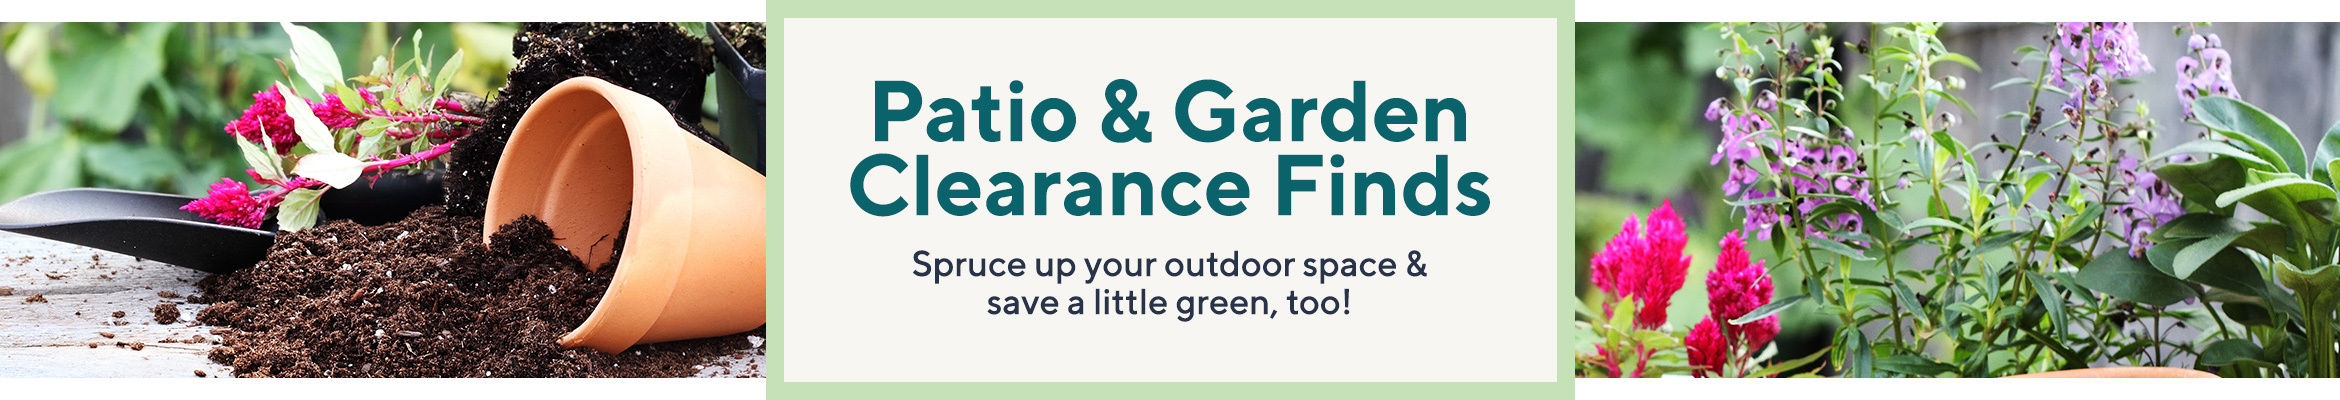 Patio & Garden Clearance Finds  Spruce up your outdoor space & save a little green, too!